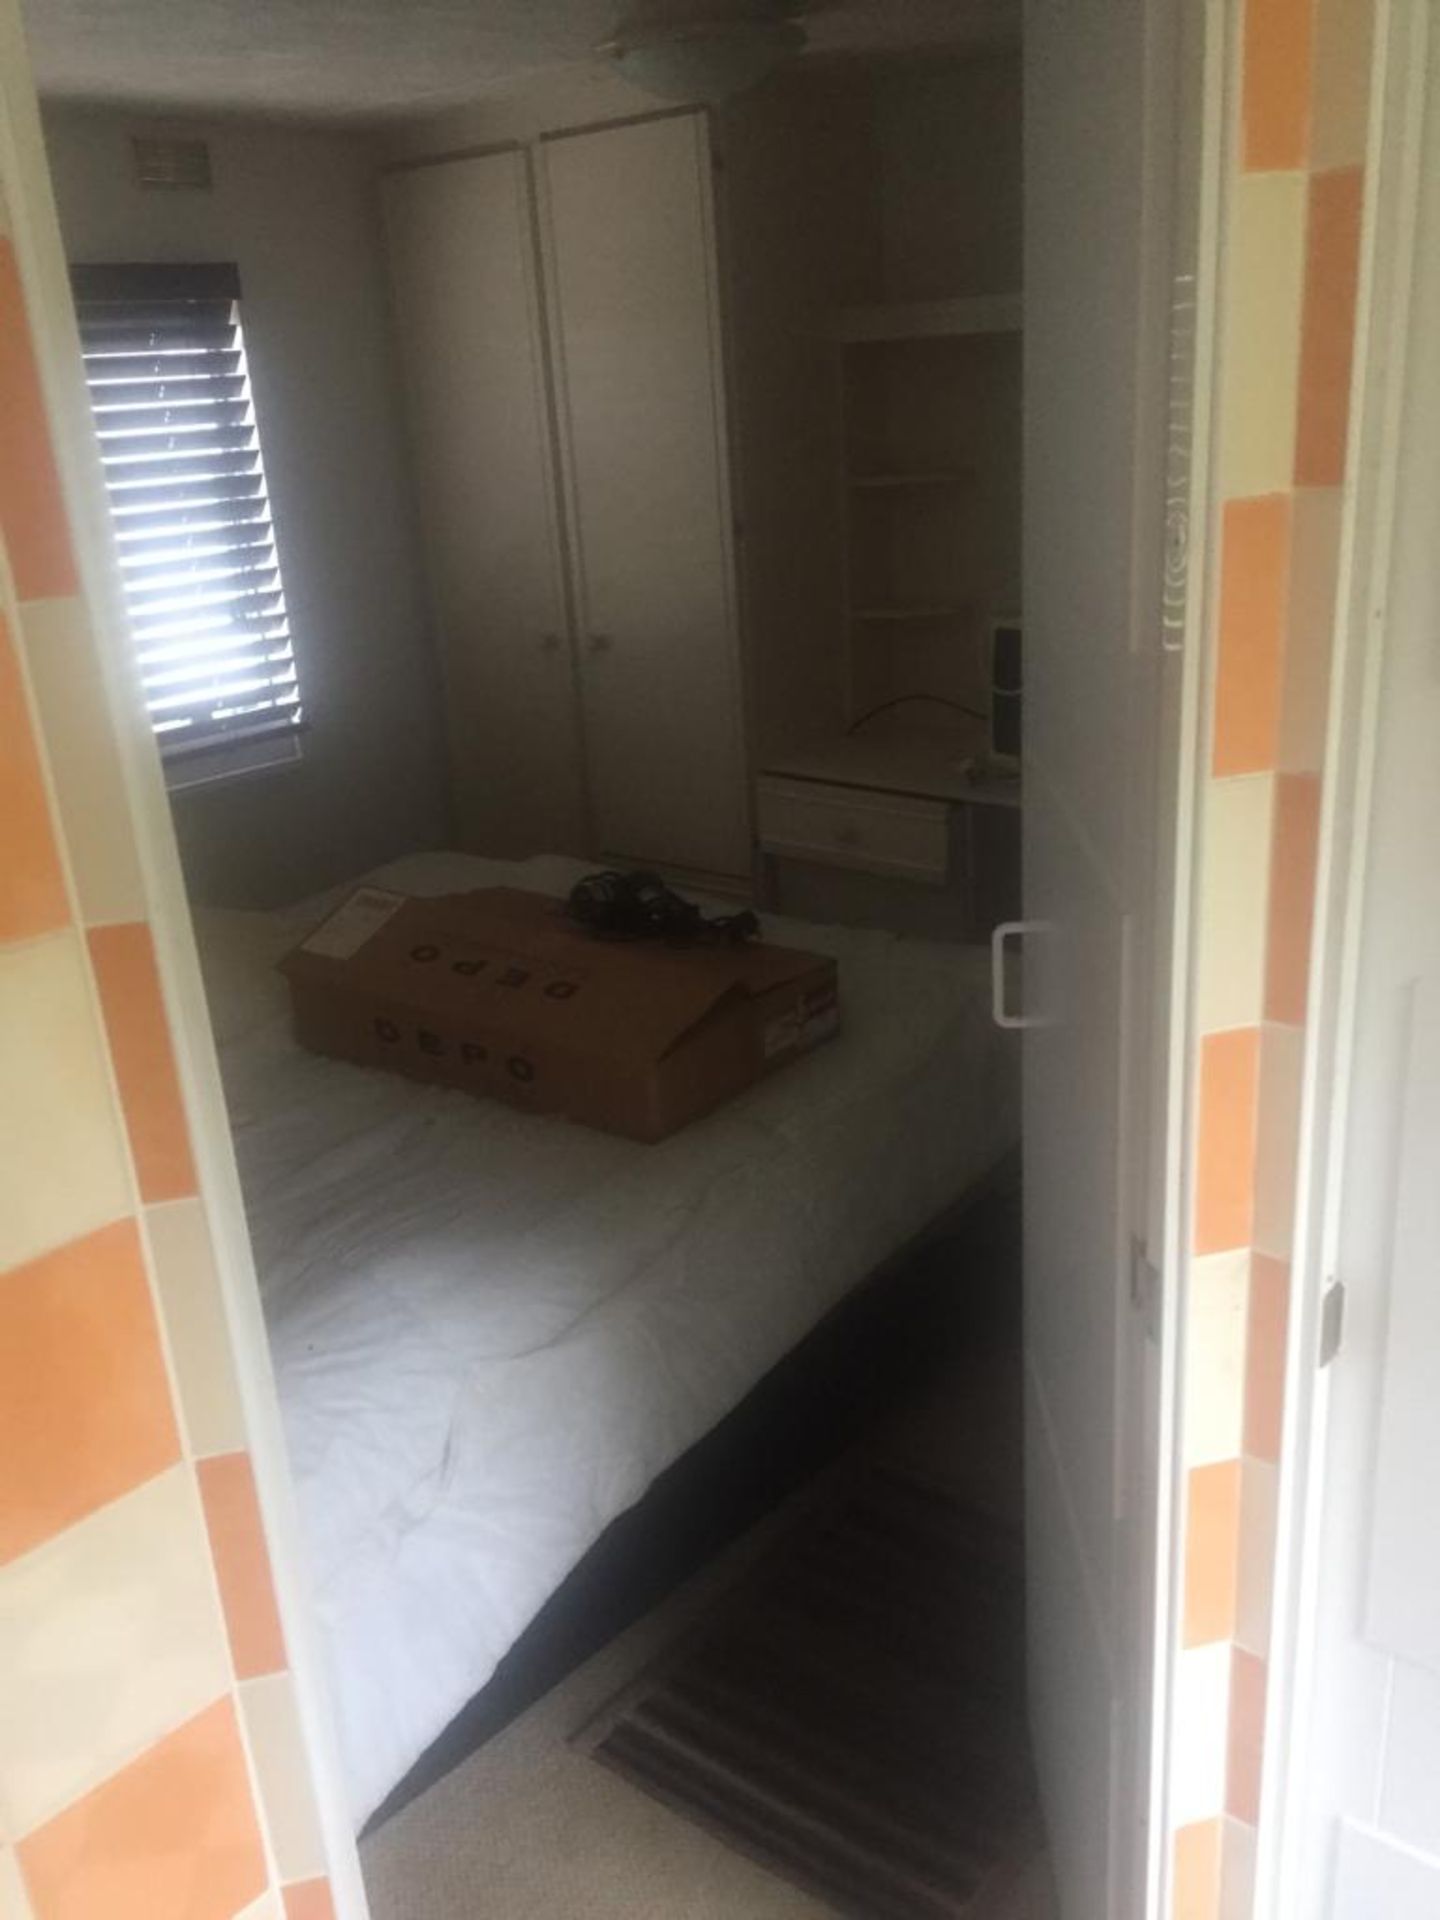 30 x 12 TWO BED STATIC CARAVAN HAS BEEN REFRESHED INSIDE FROM STANDARD INSTALL *NO VAT* - Image 11 of 22